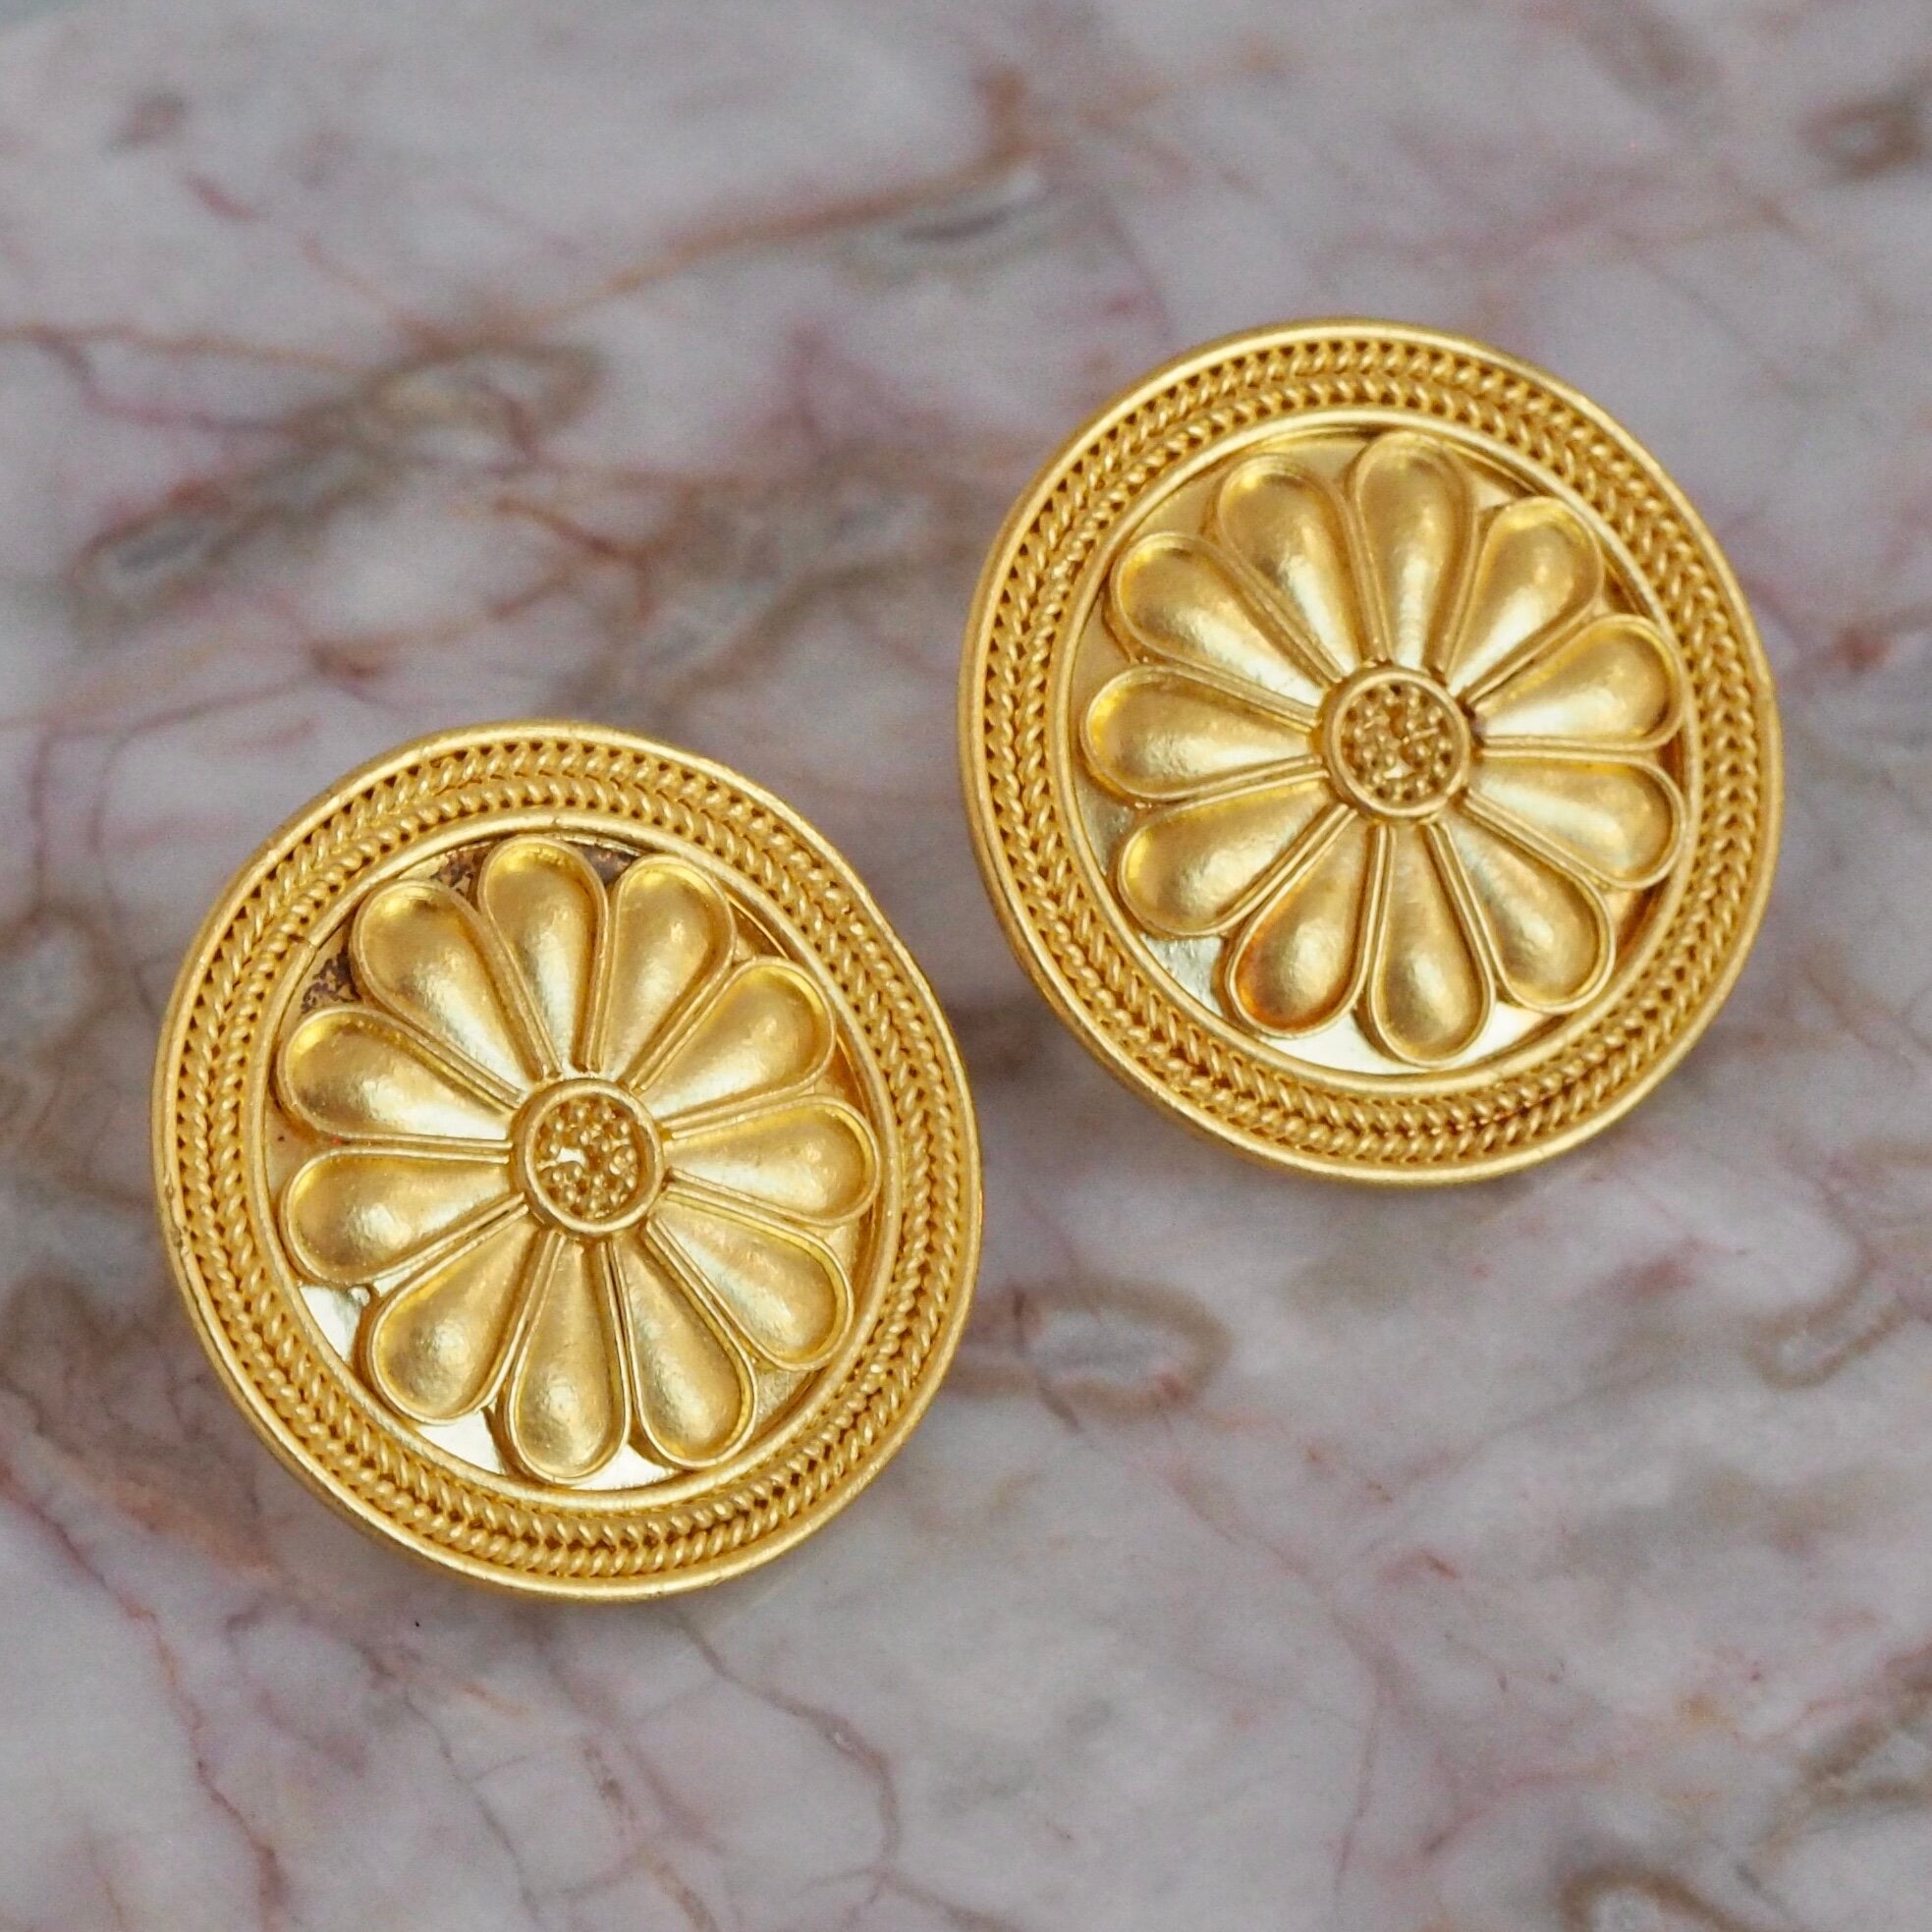 Vintage Ancient Style 22k Gold Floral Disc Earrings